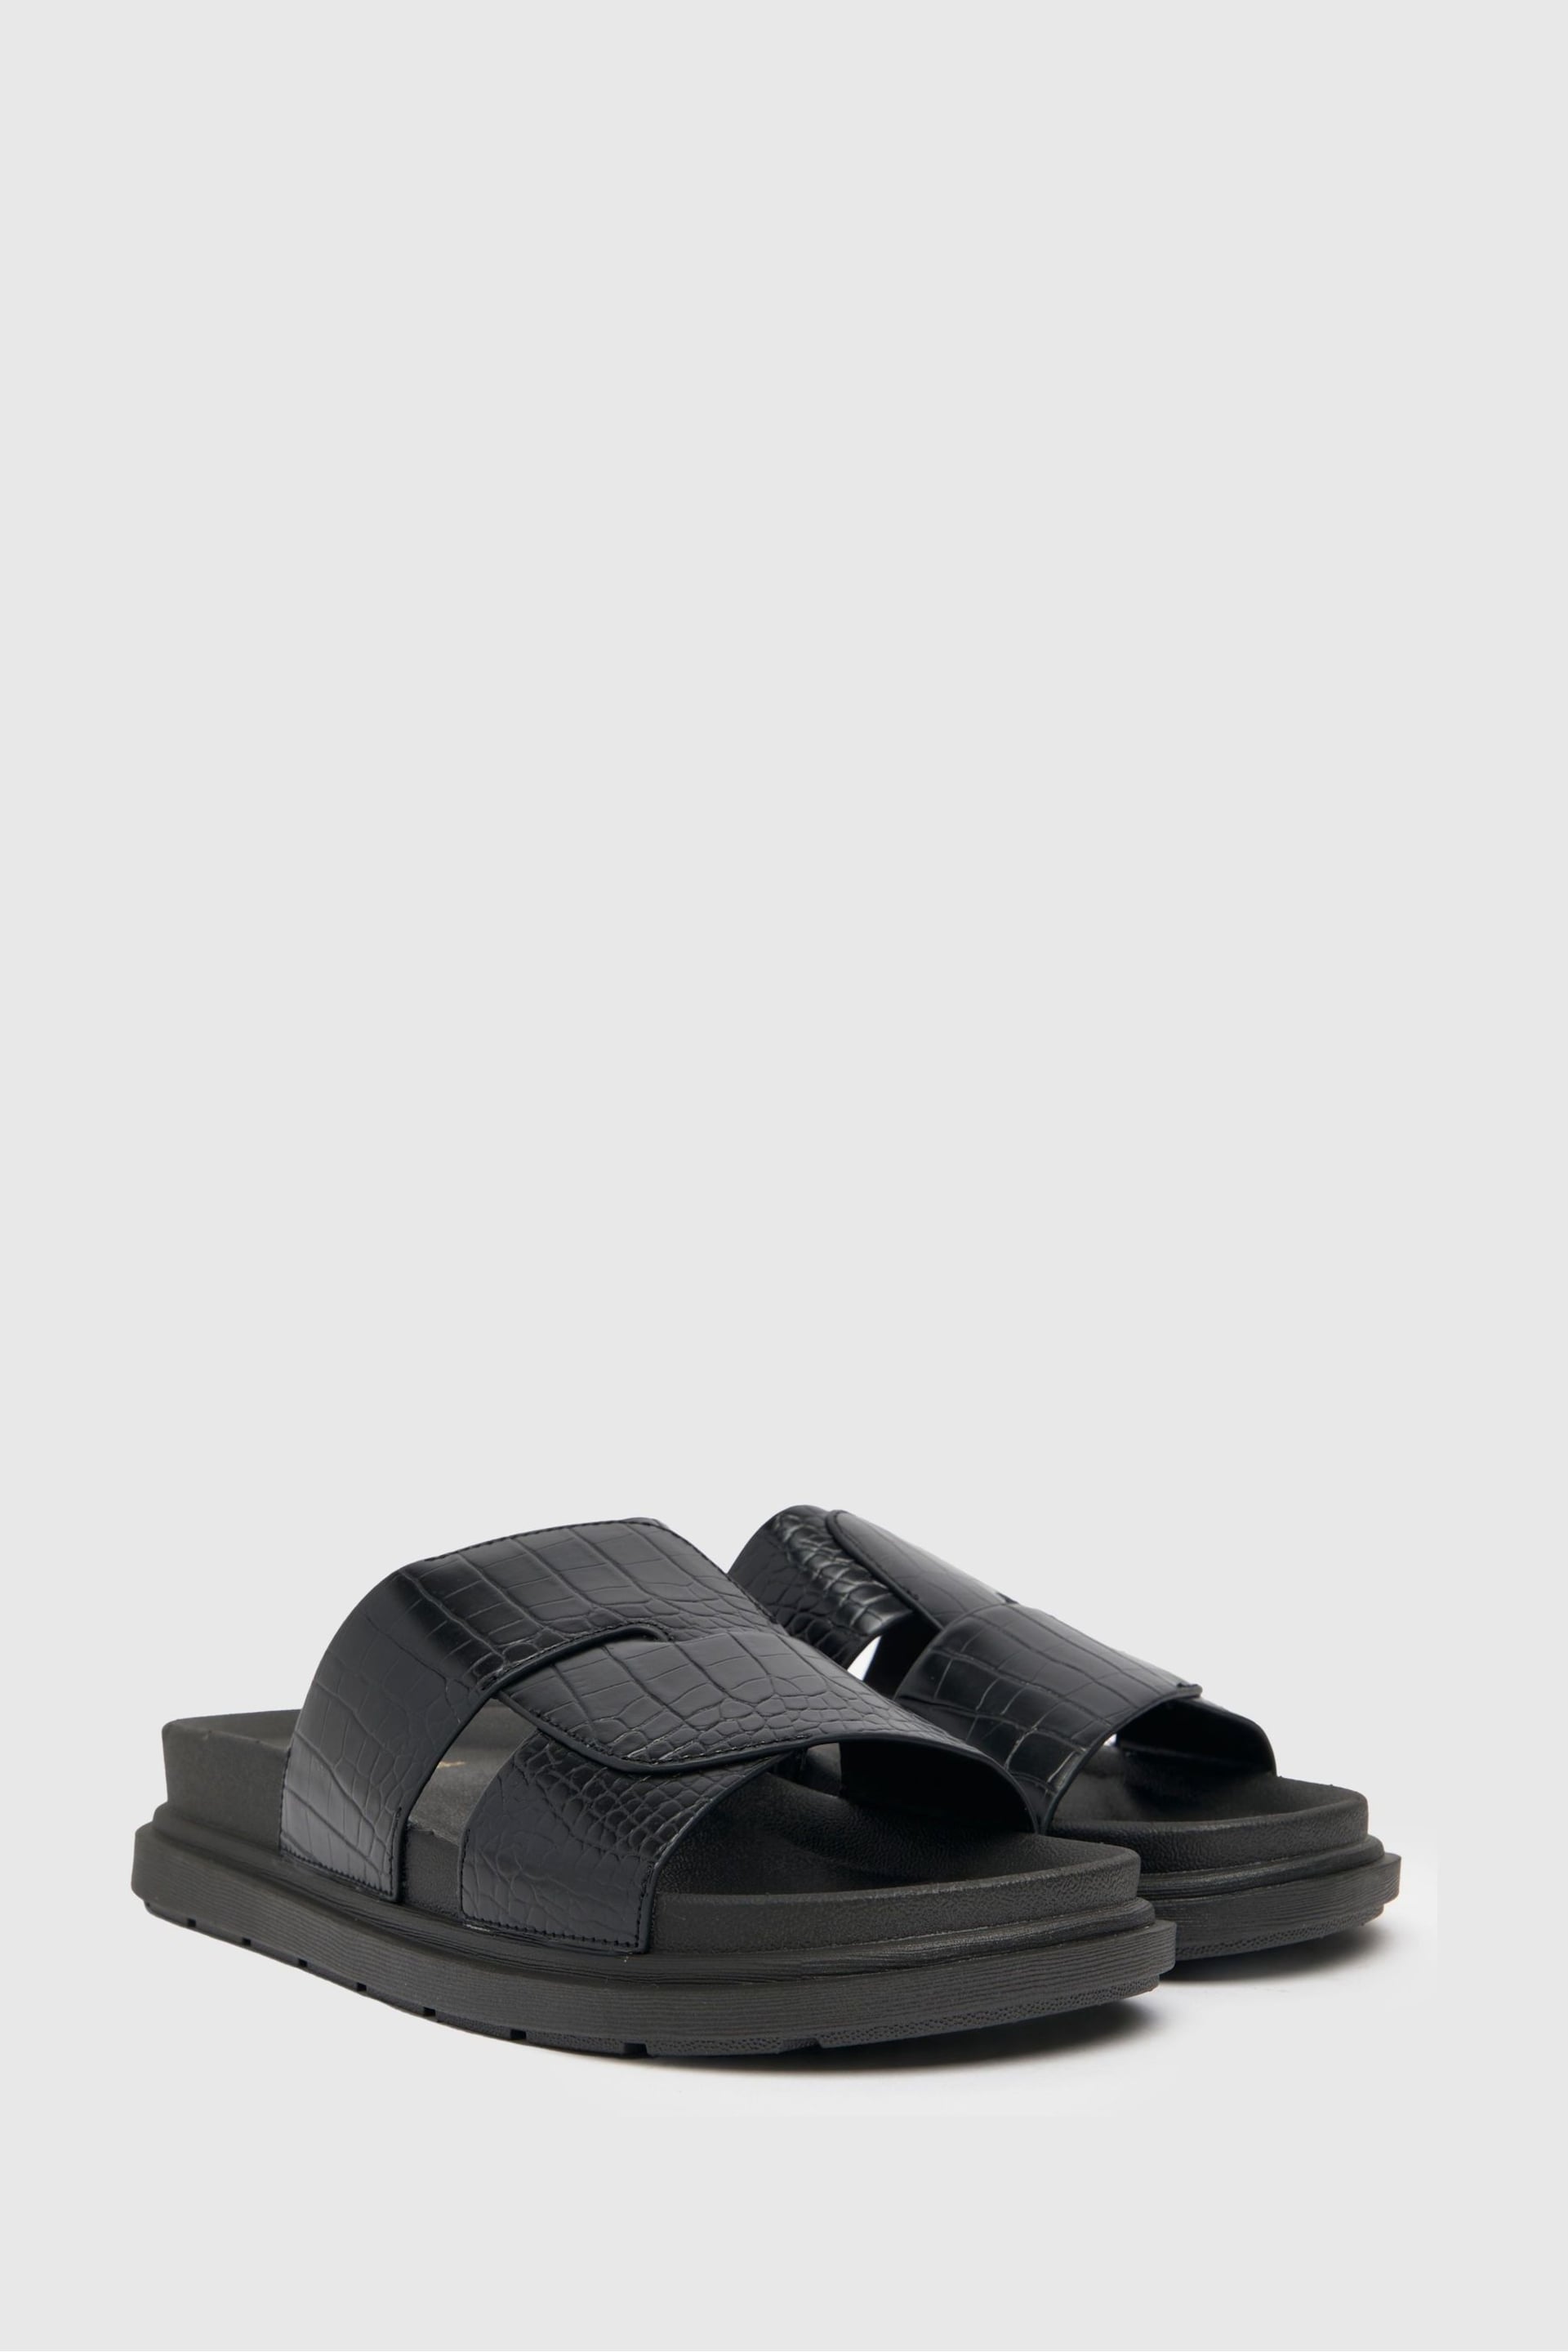 Schuh Tally Croc Cross Strap Footbed Sandals - Image 2 of 2